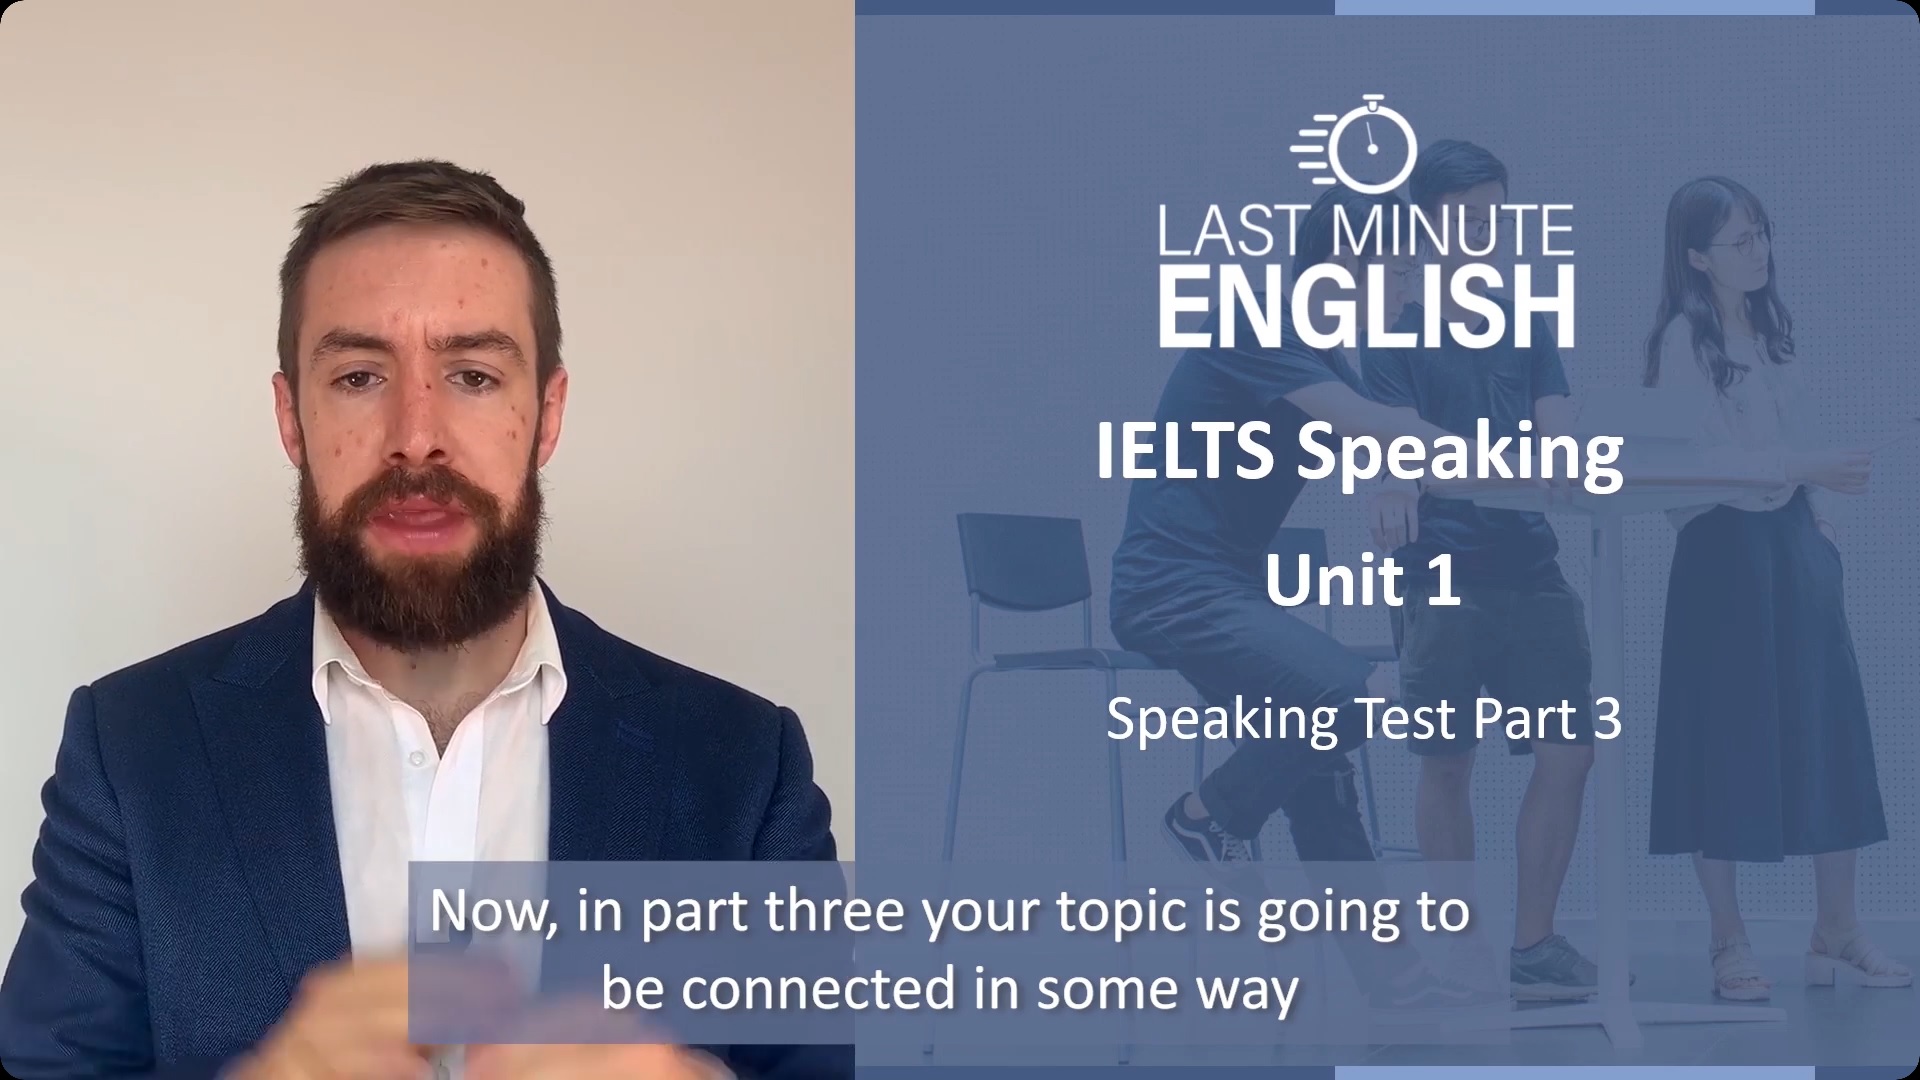 IELTS Speaking Test: Introduction to Part 3